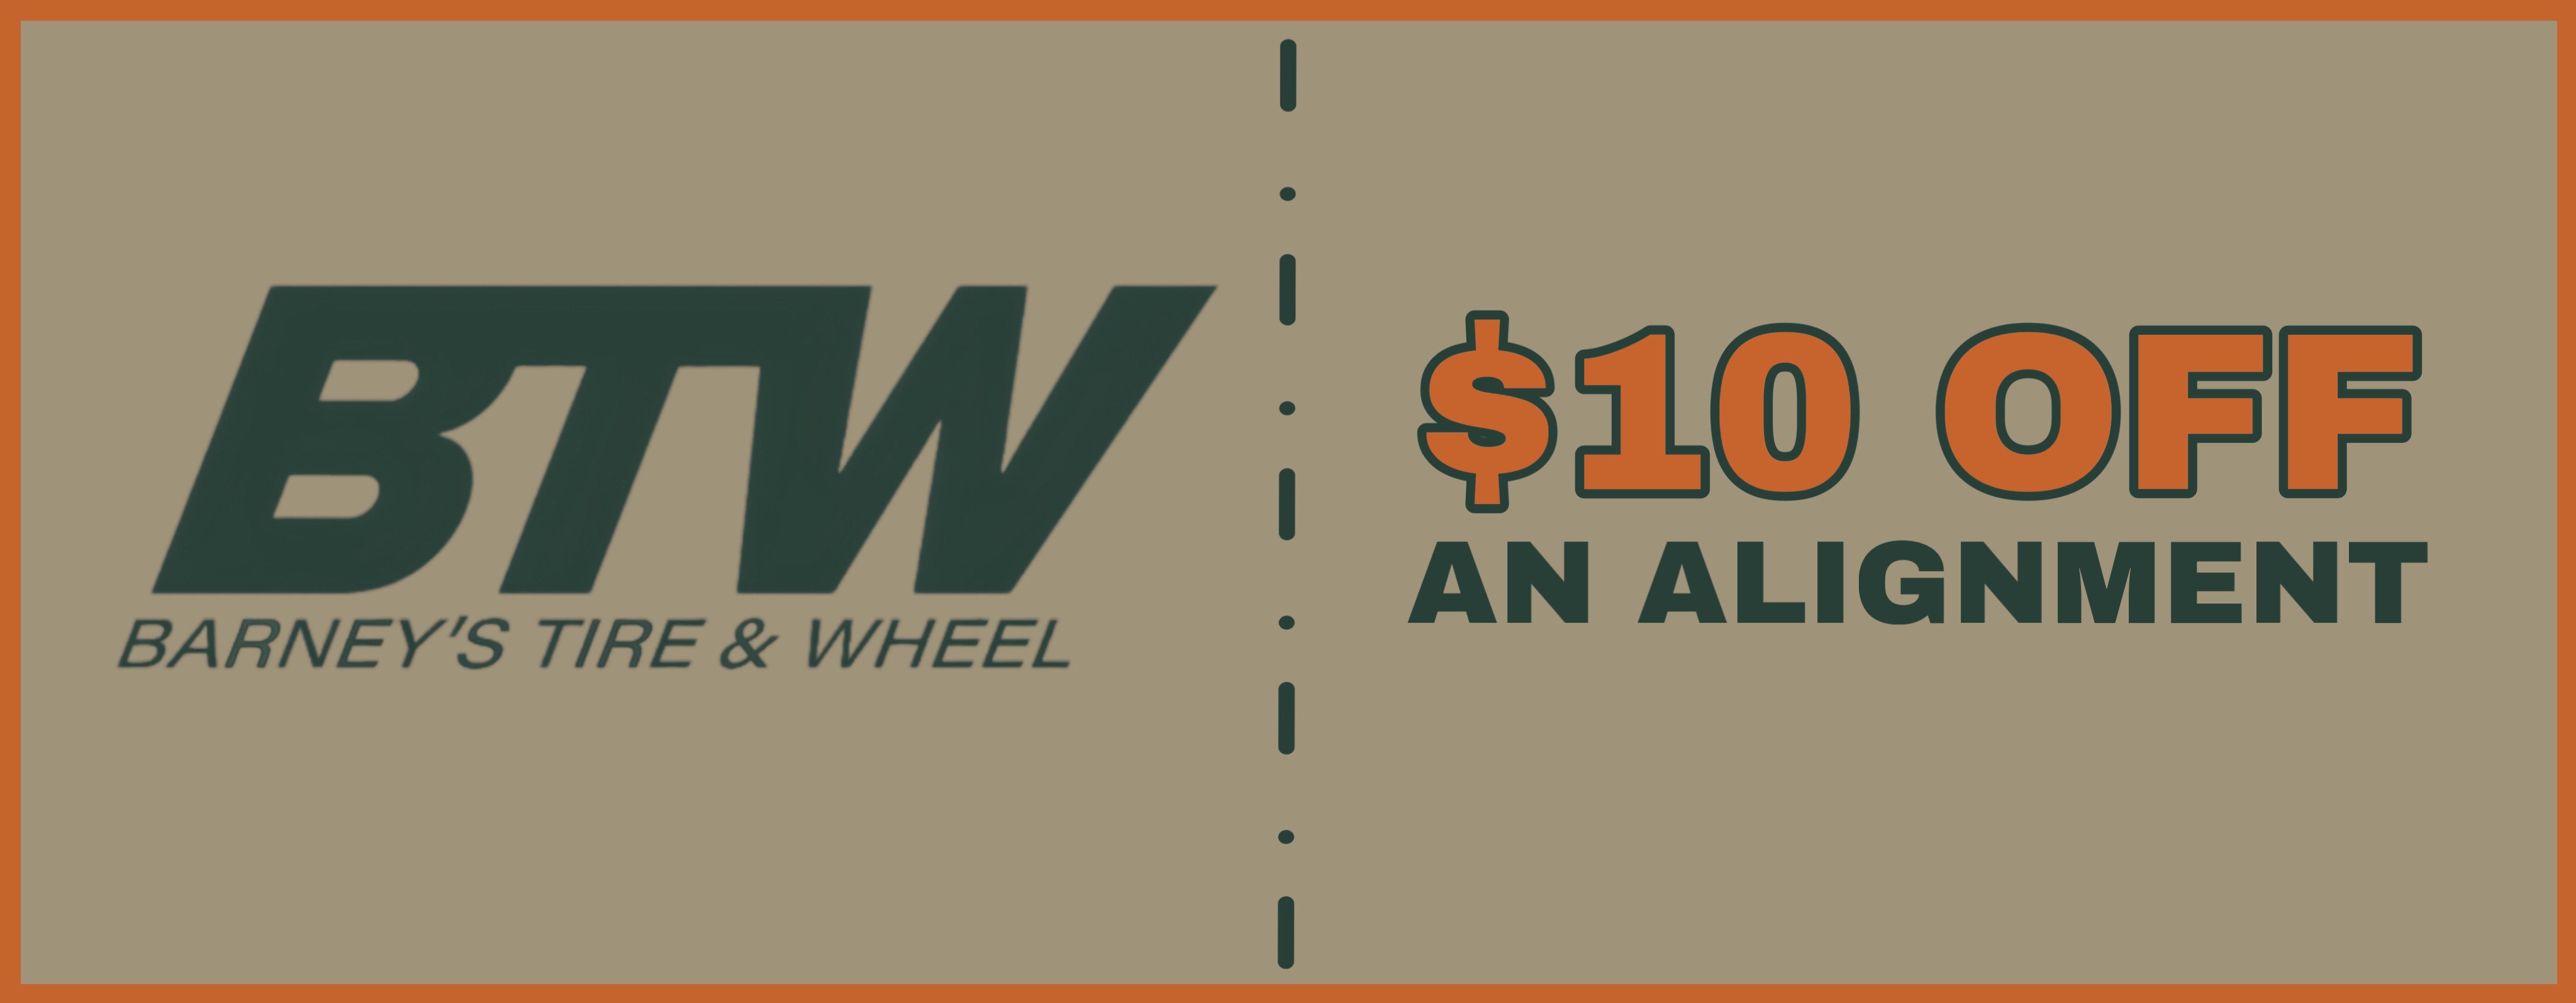 $10 off an alignment